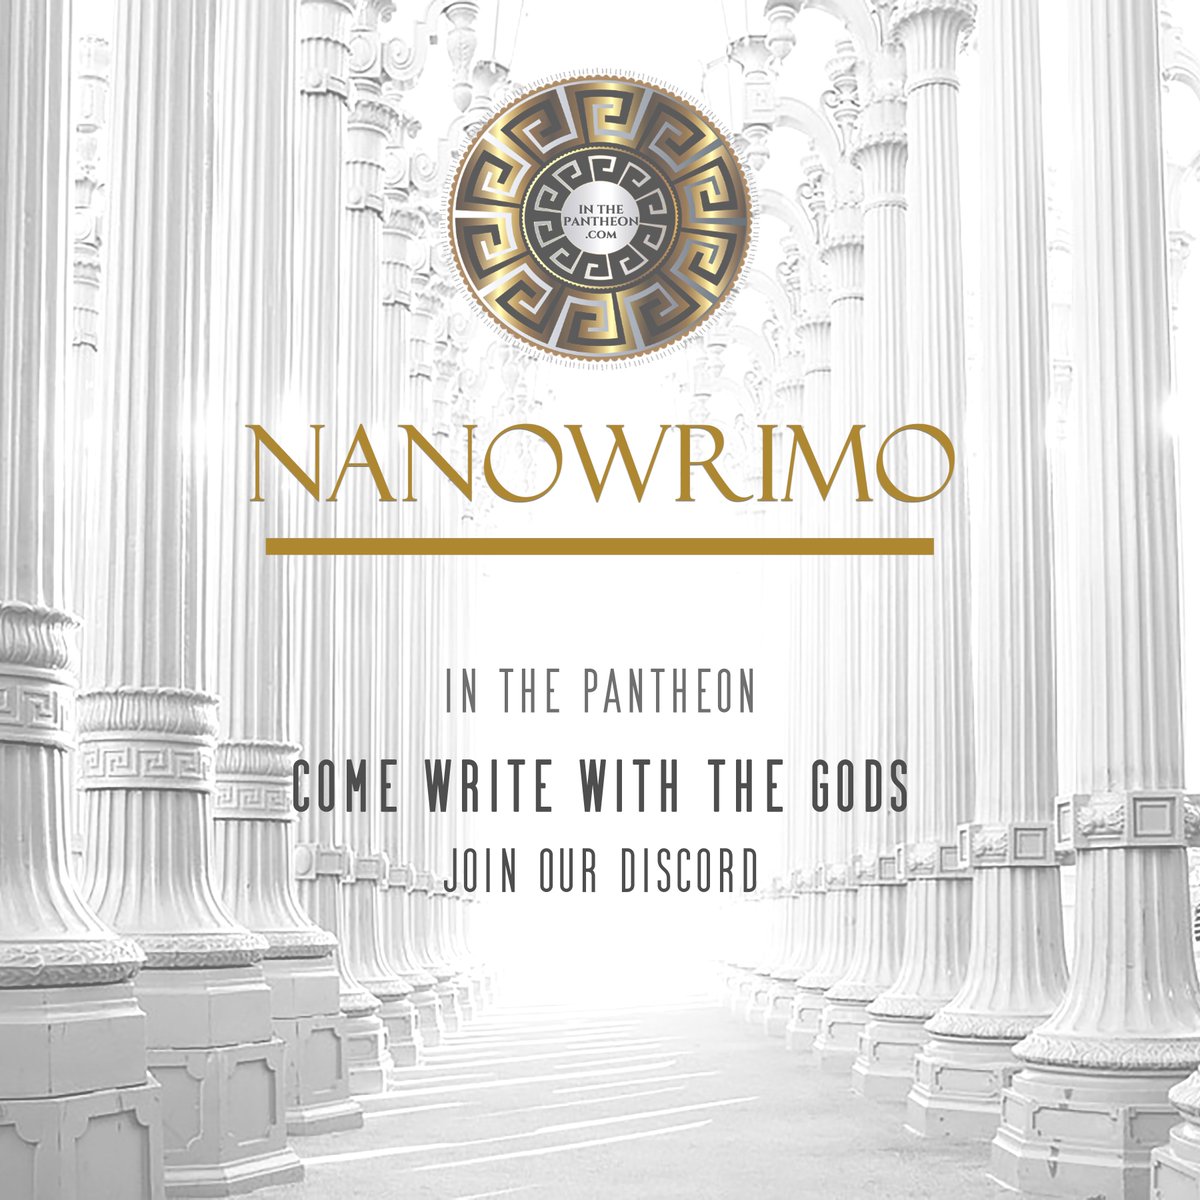 We're doing it again! If you plan on doing #NaNoWriMo this year, come join us on our Discord server. We've got workshops and giveaways, sprints and tons of support! Our kickoff event is 11/1 6-9pm EST #InThePantheon #WritingCommunity discord.gg/epsgQNzU